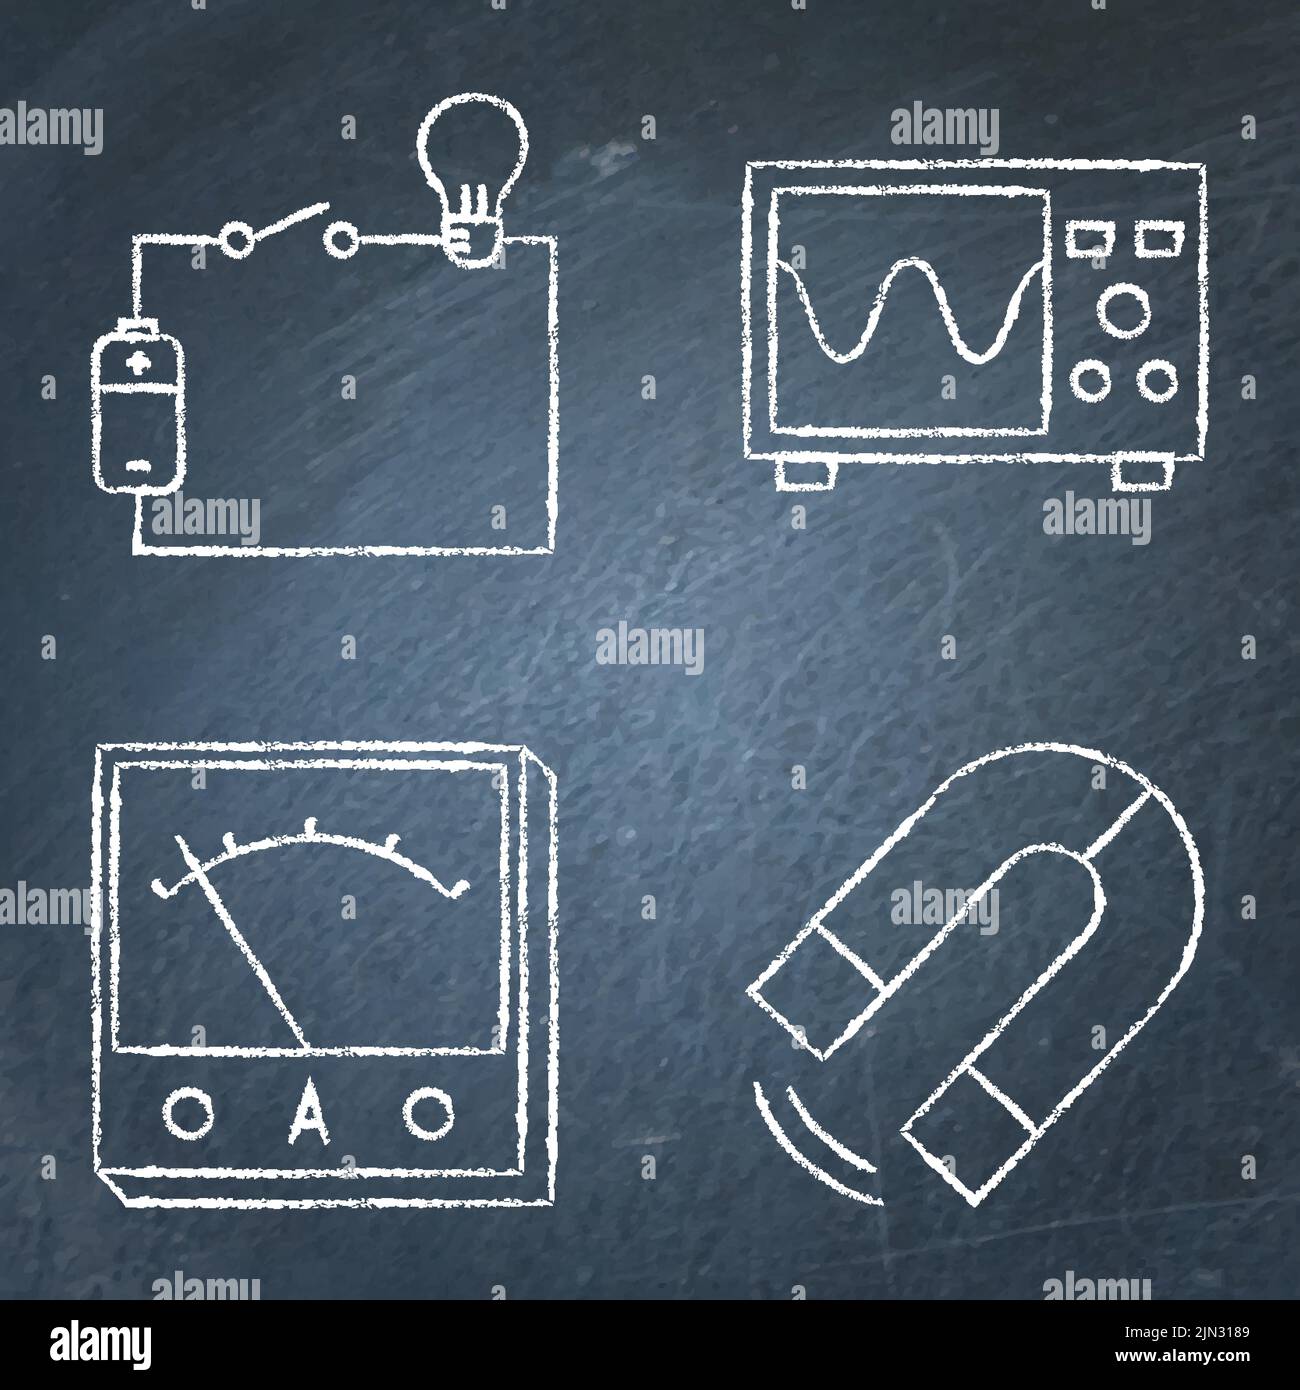 Physics icon set on chalkboard. Electric circuit scheme, magnetic force, ammeter and oscilloscope symbols. Vector illustration. Stock Vector